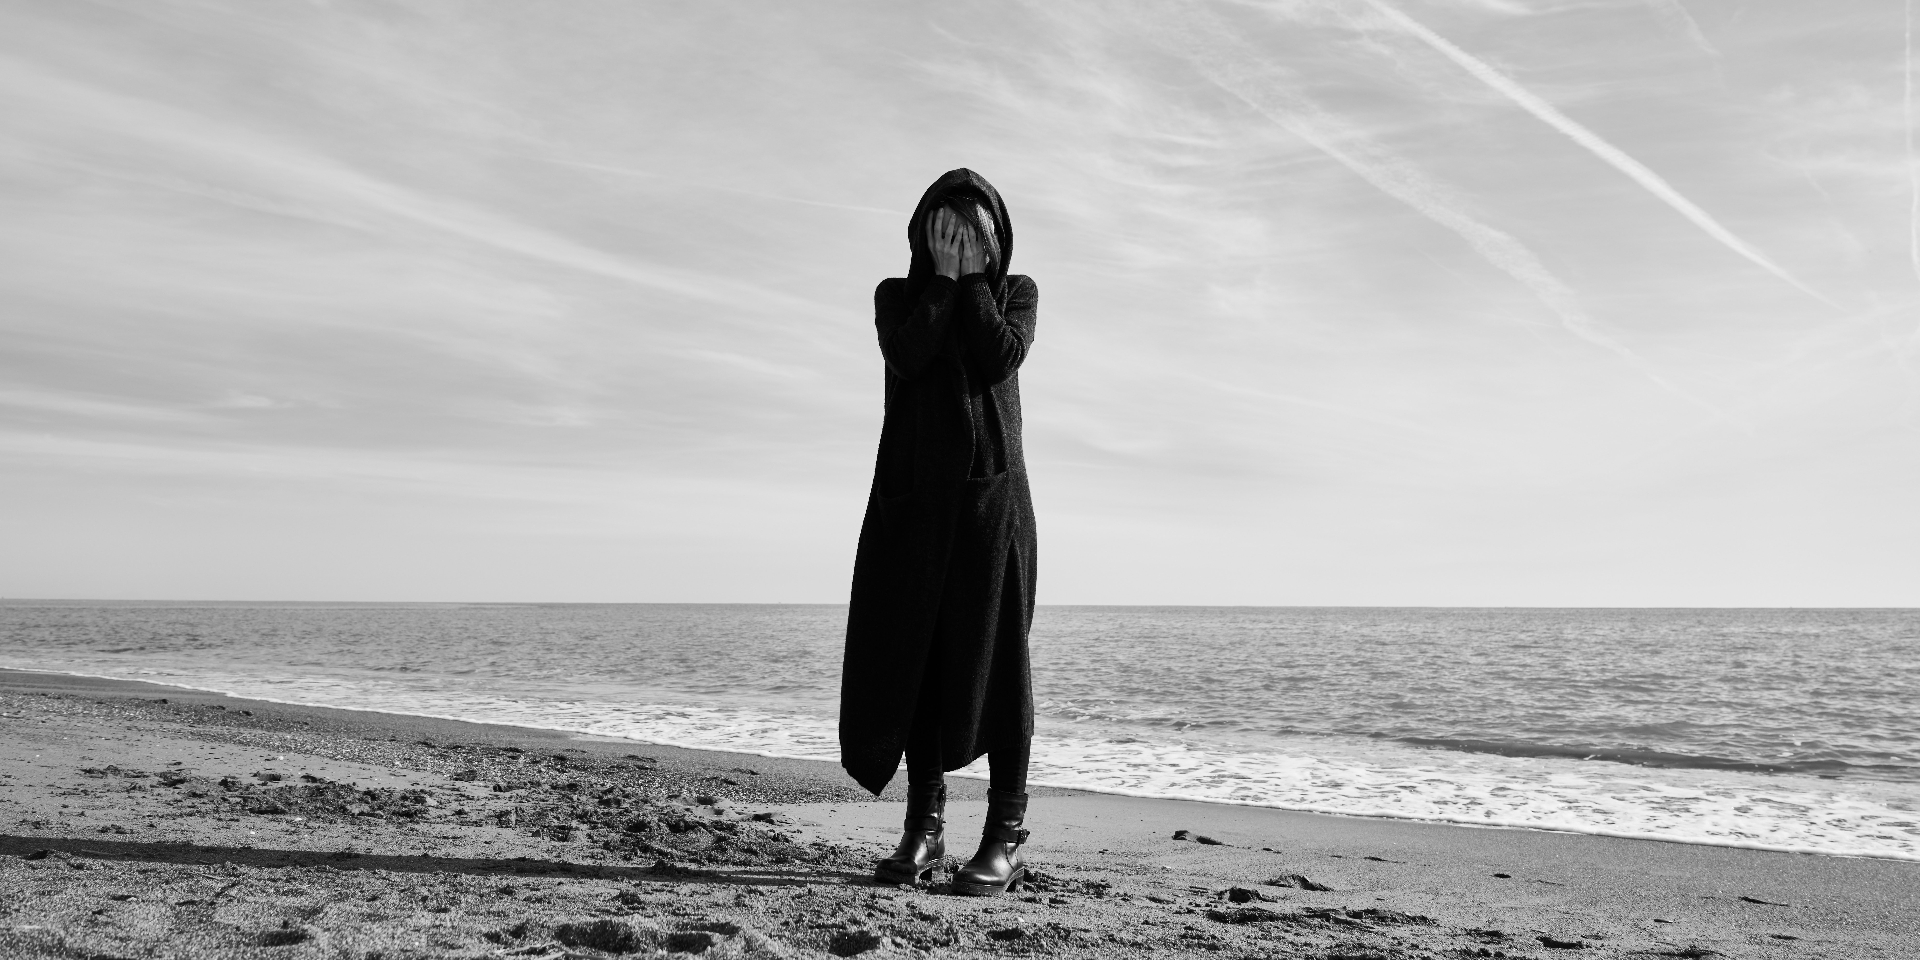 Image of a woman wearing black and covering her face while standing on a beach. Depression can be overwhelming to manage alone. Learn how depression therapy in Saint Petersburg, FL can help you cope with your symptoms.